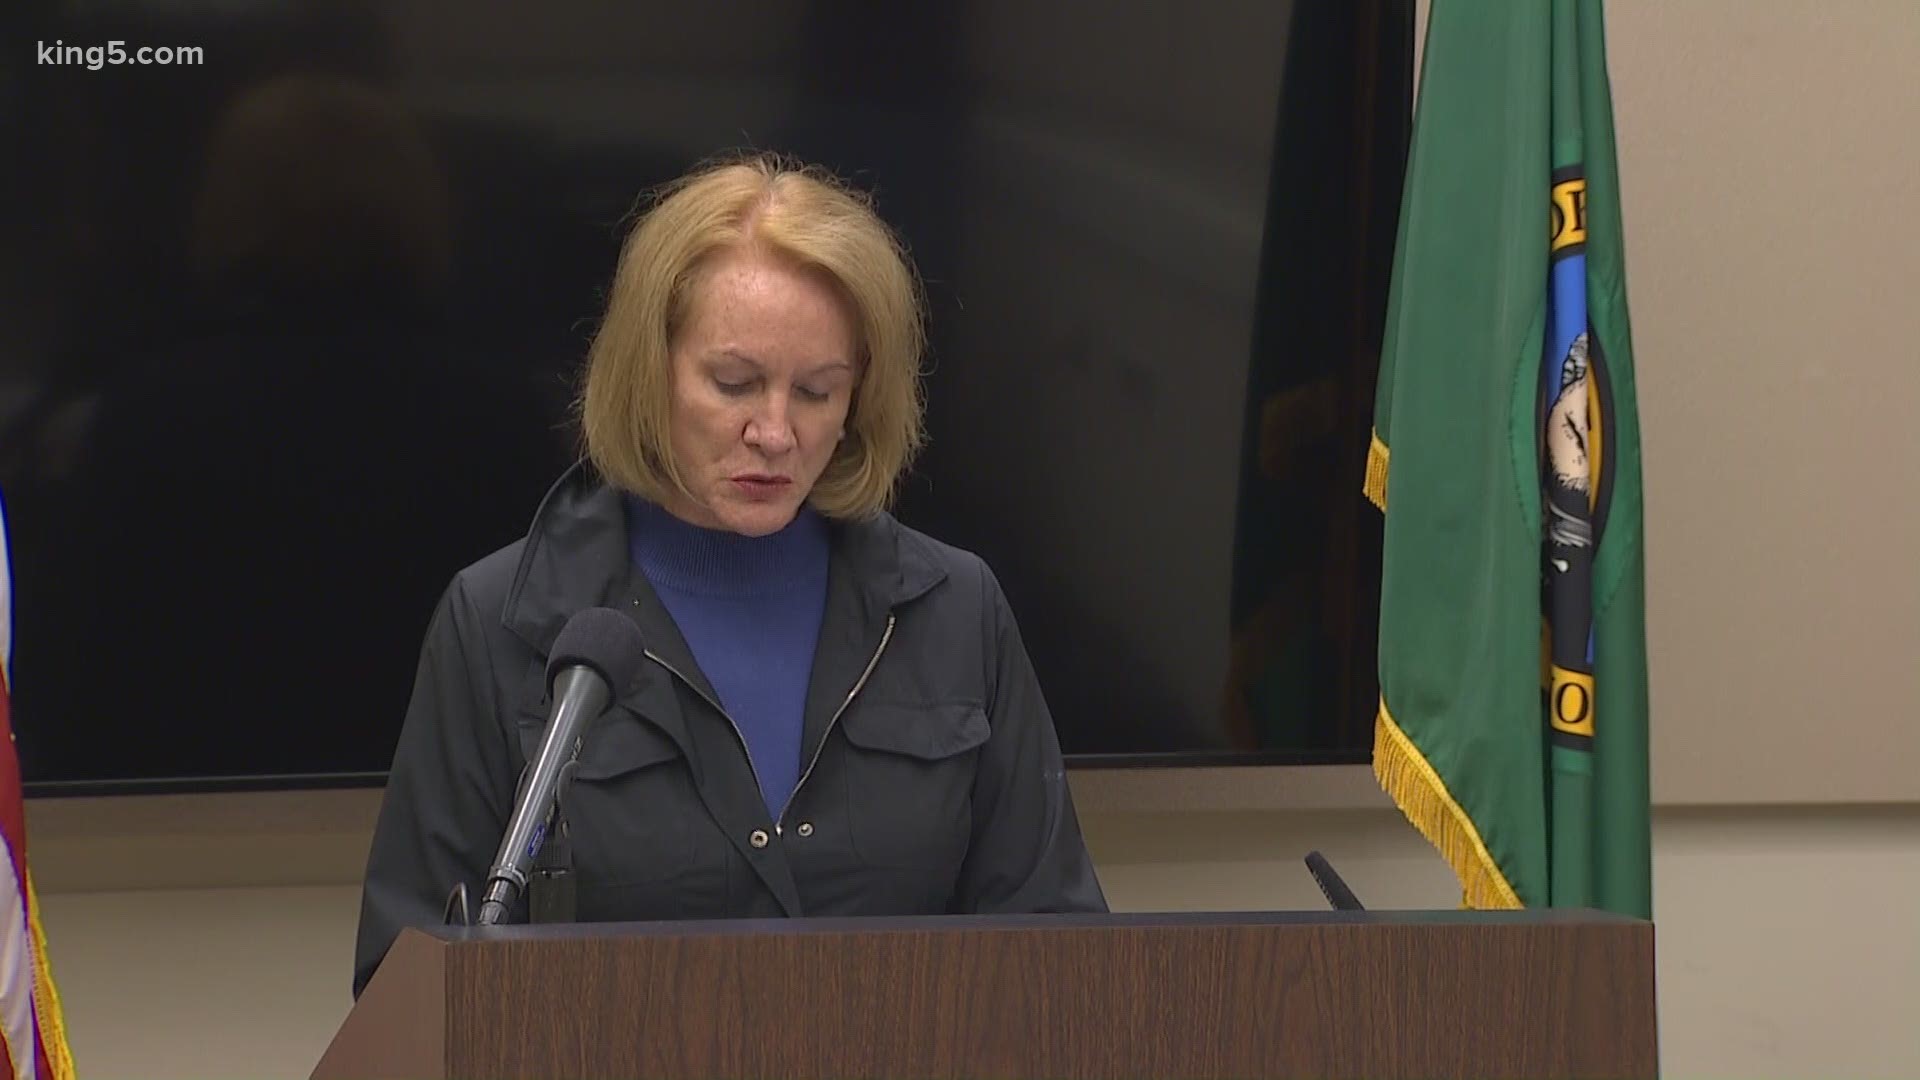 Mayor Jenny Durkan imposed a curfew from 5 p.m. to 5 a.m. after a peaceful demonstration turned destructive.